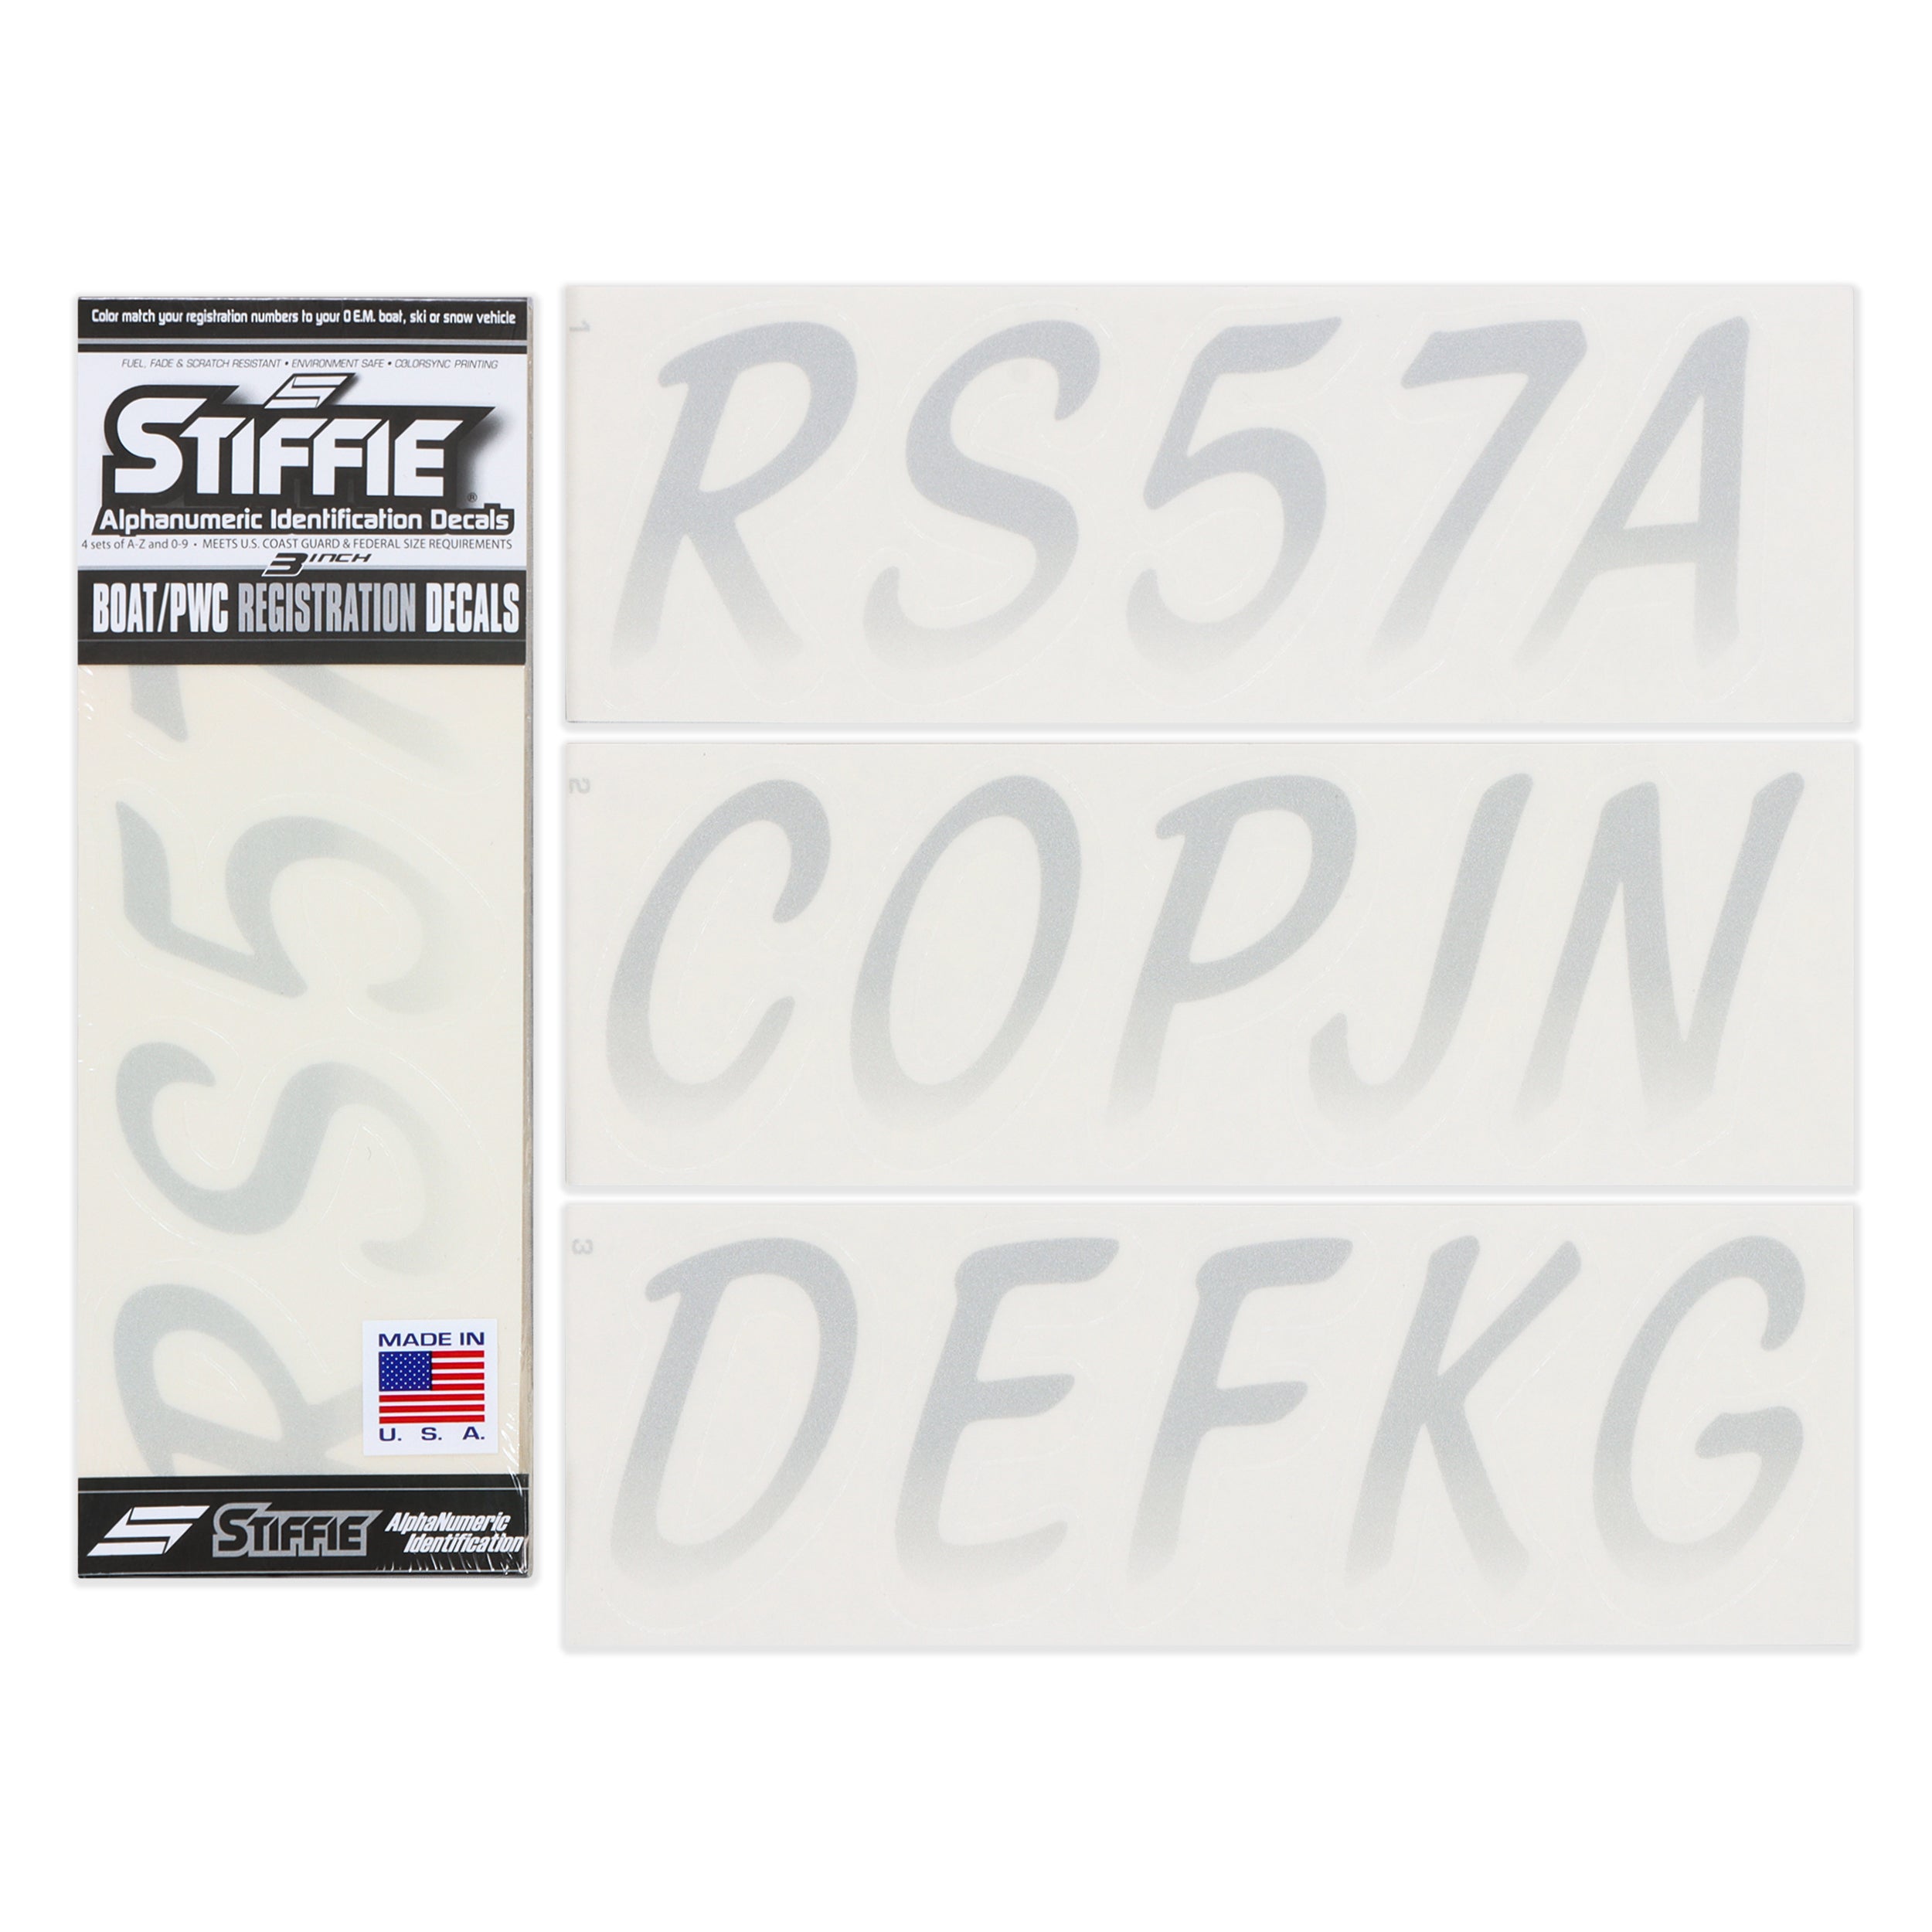 Stiffie Whipline Met. Silver/Transparent Clear 3" Alpha-Numeric Registration Identification Numbers Stickers Decals for Boats & Personal Watercraft